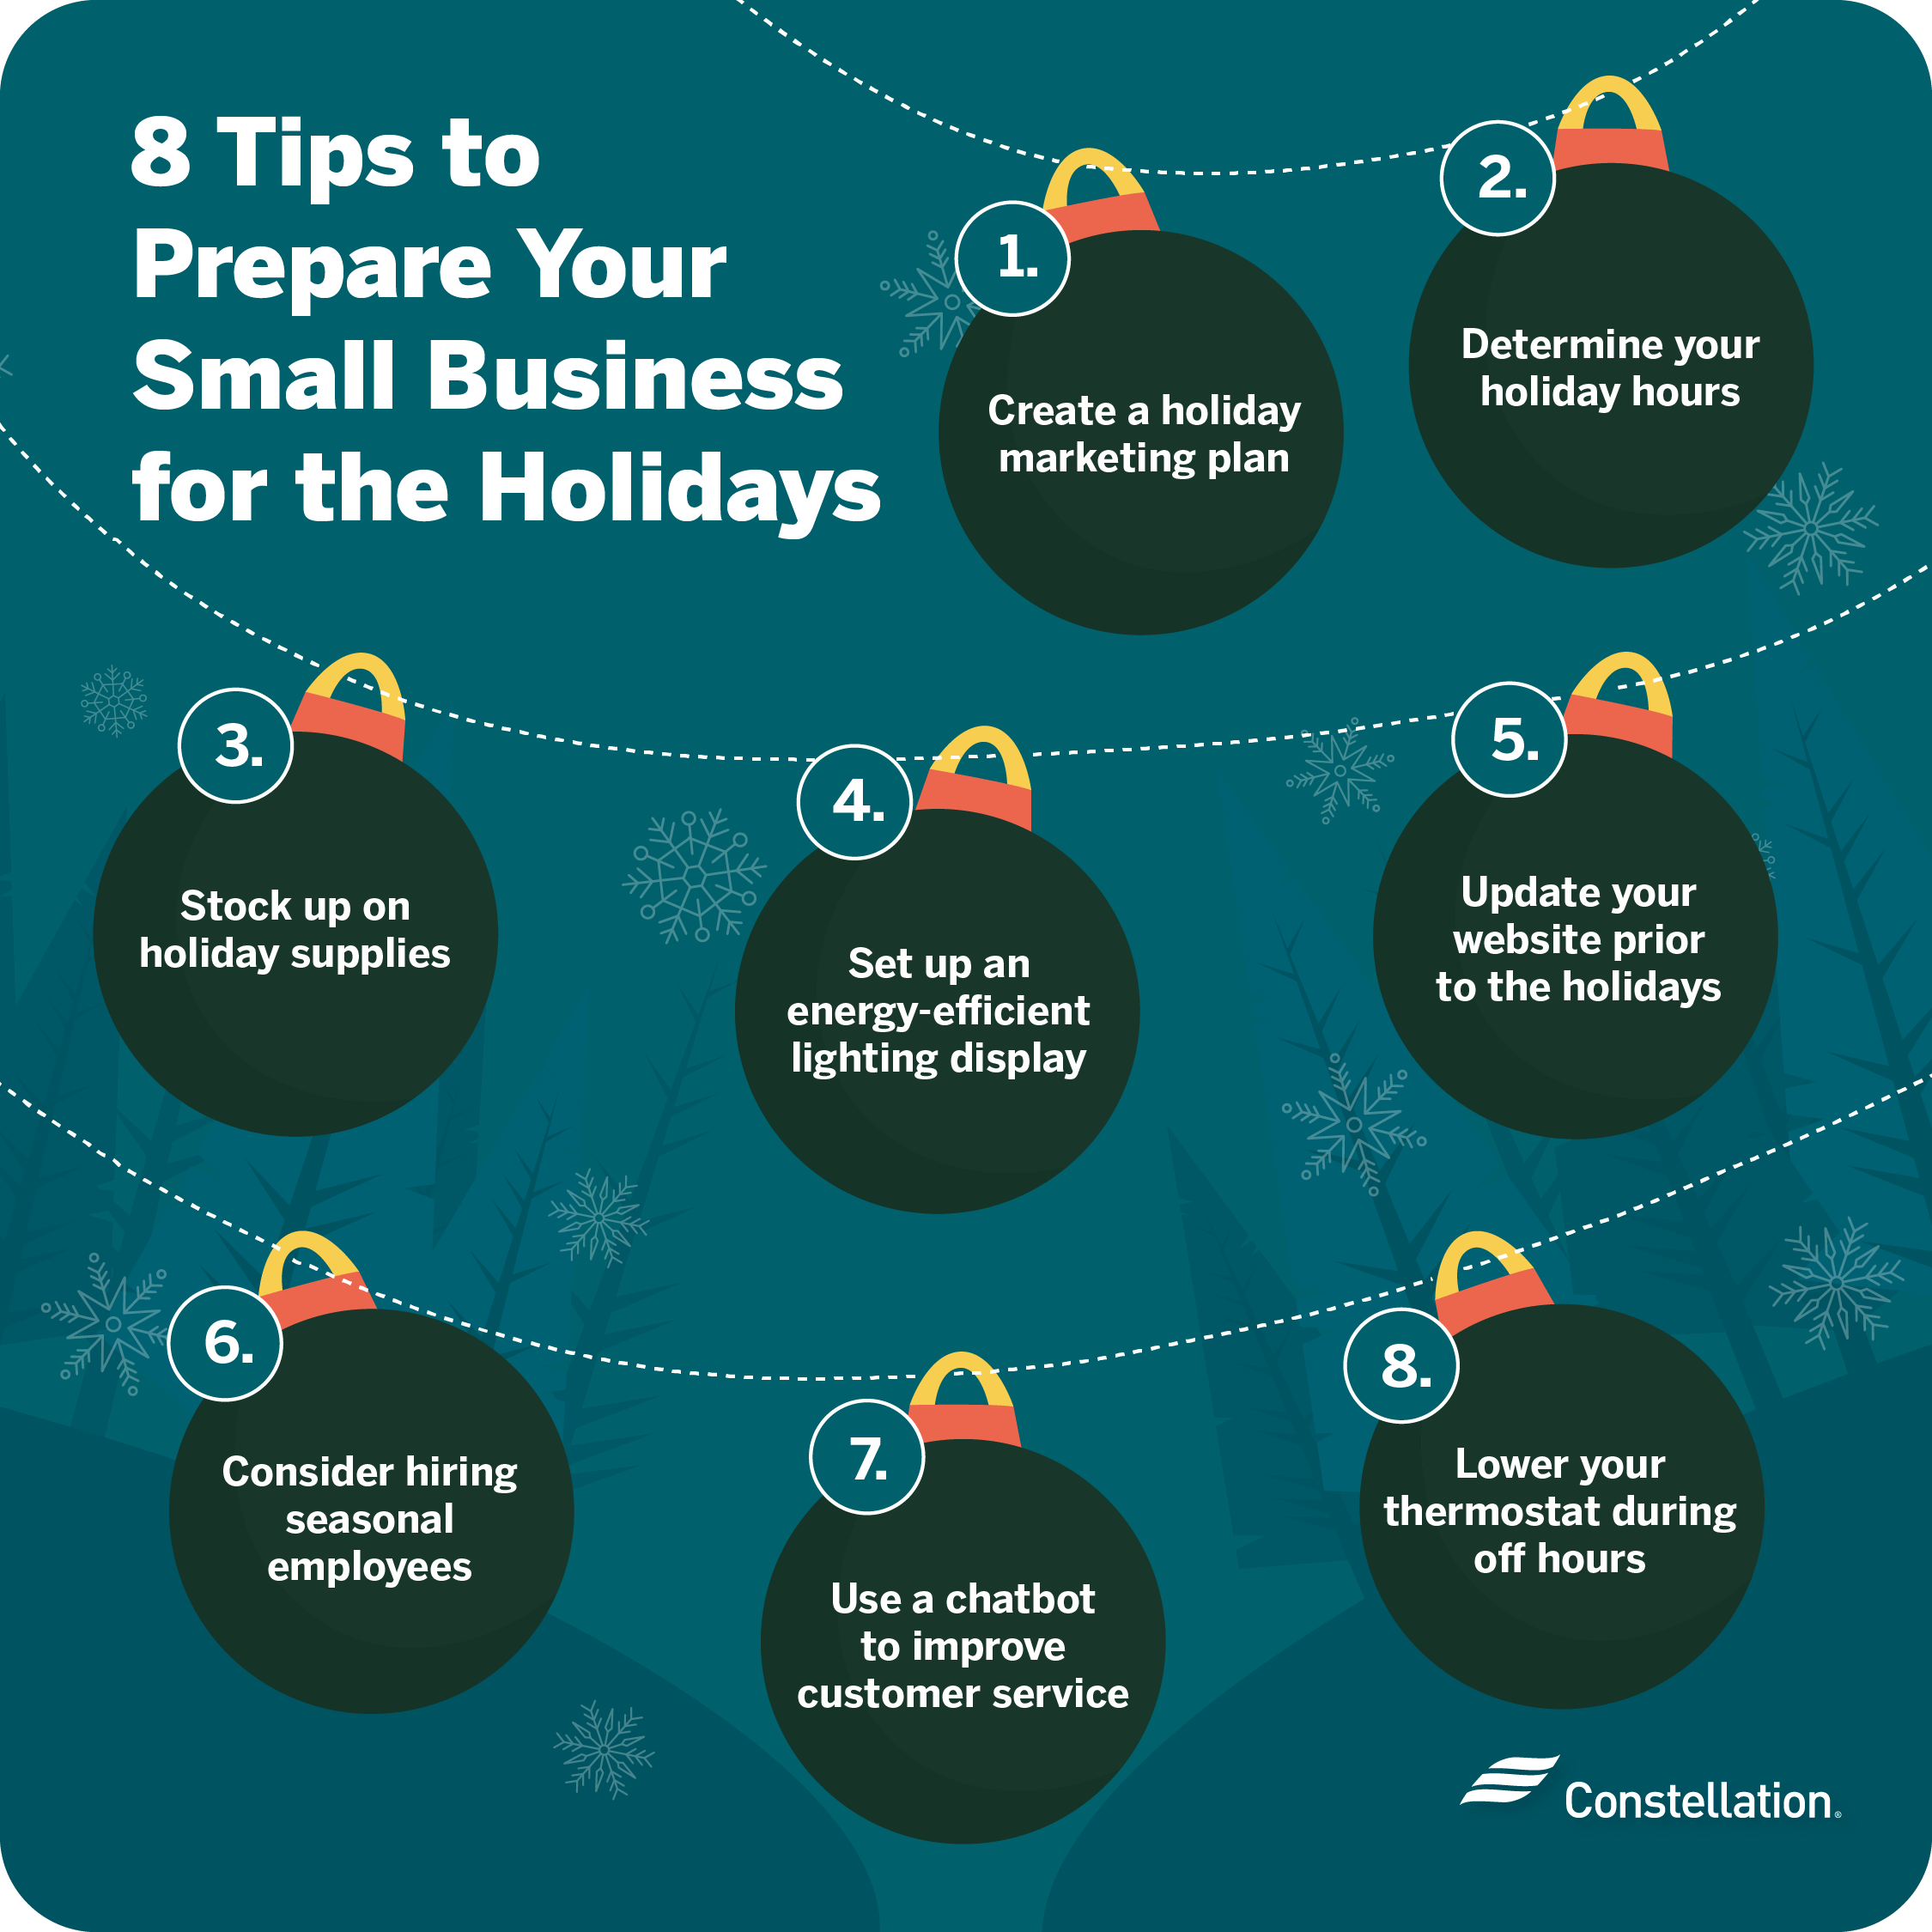 How to prepare your small business for the holidays.